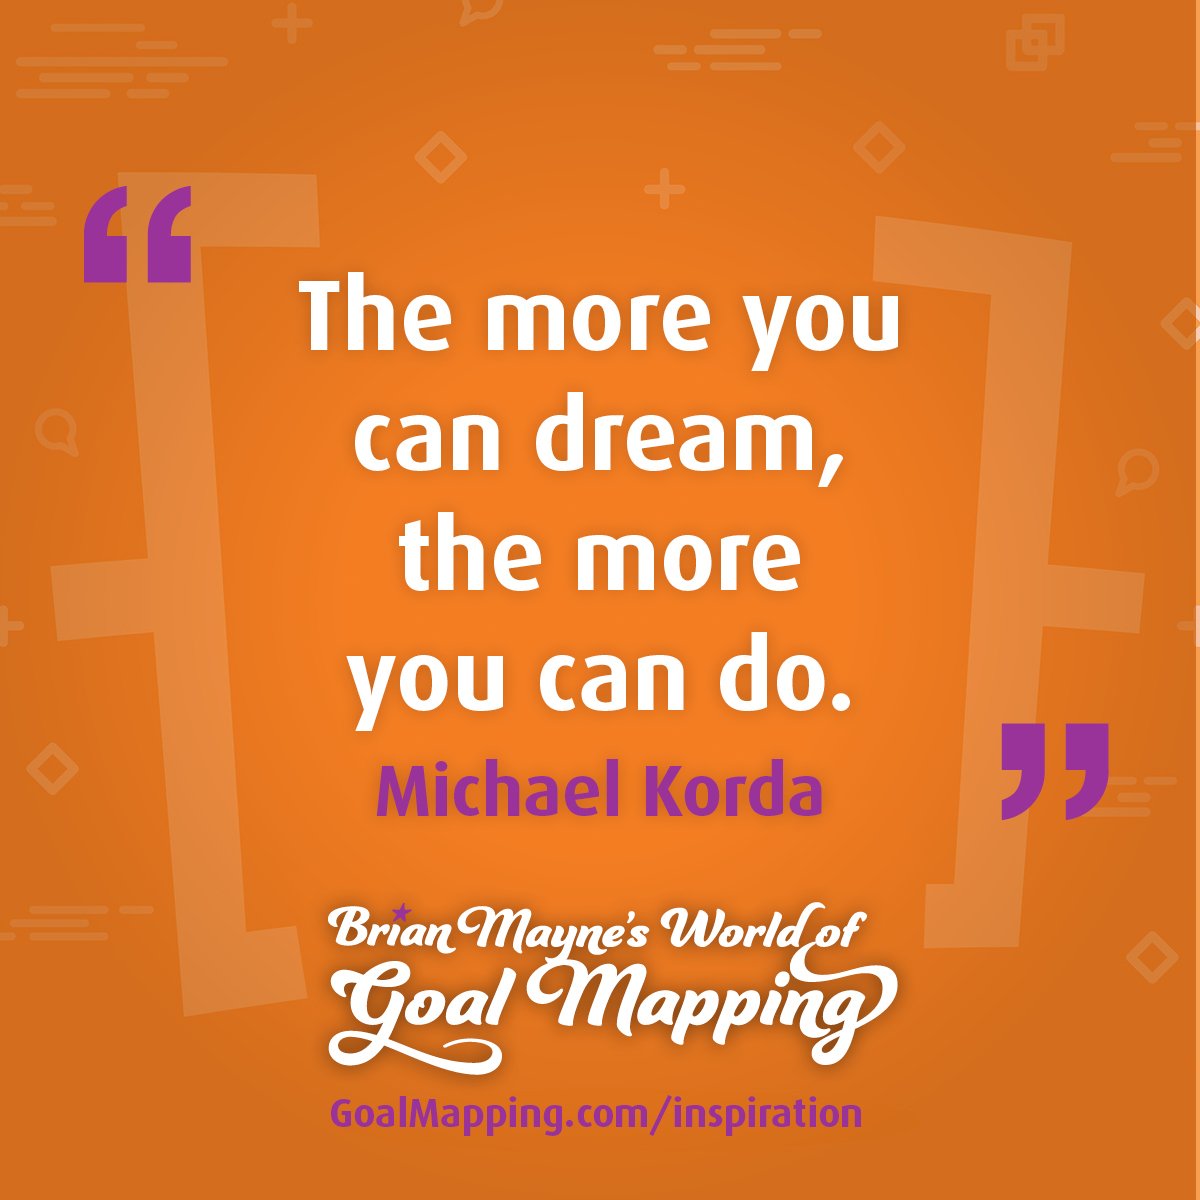 "The more you can dream, the more you can do." Michael Korda